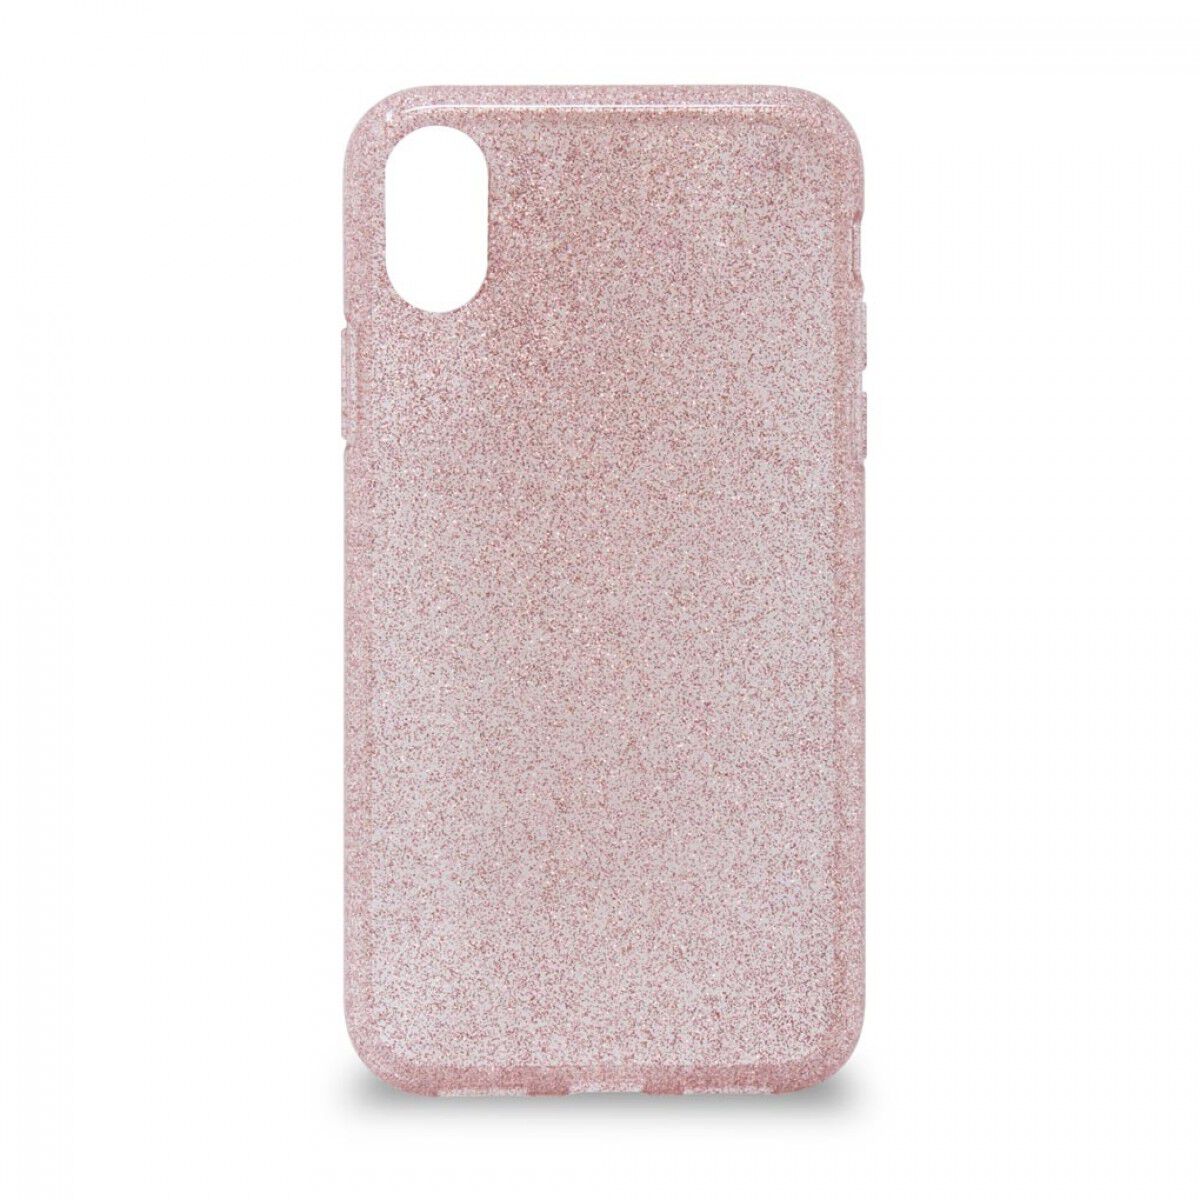 Showtime Glitter Case (Rose Gold) for Apple iPhone X